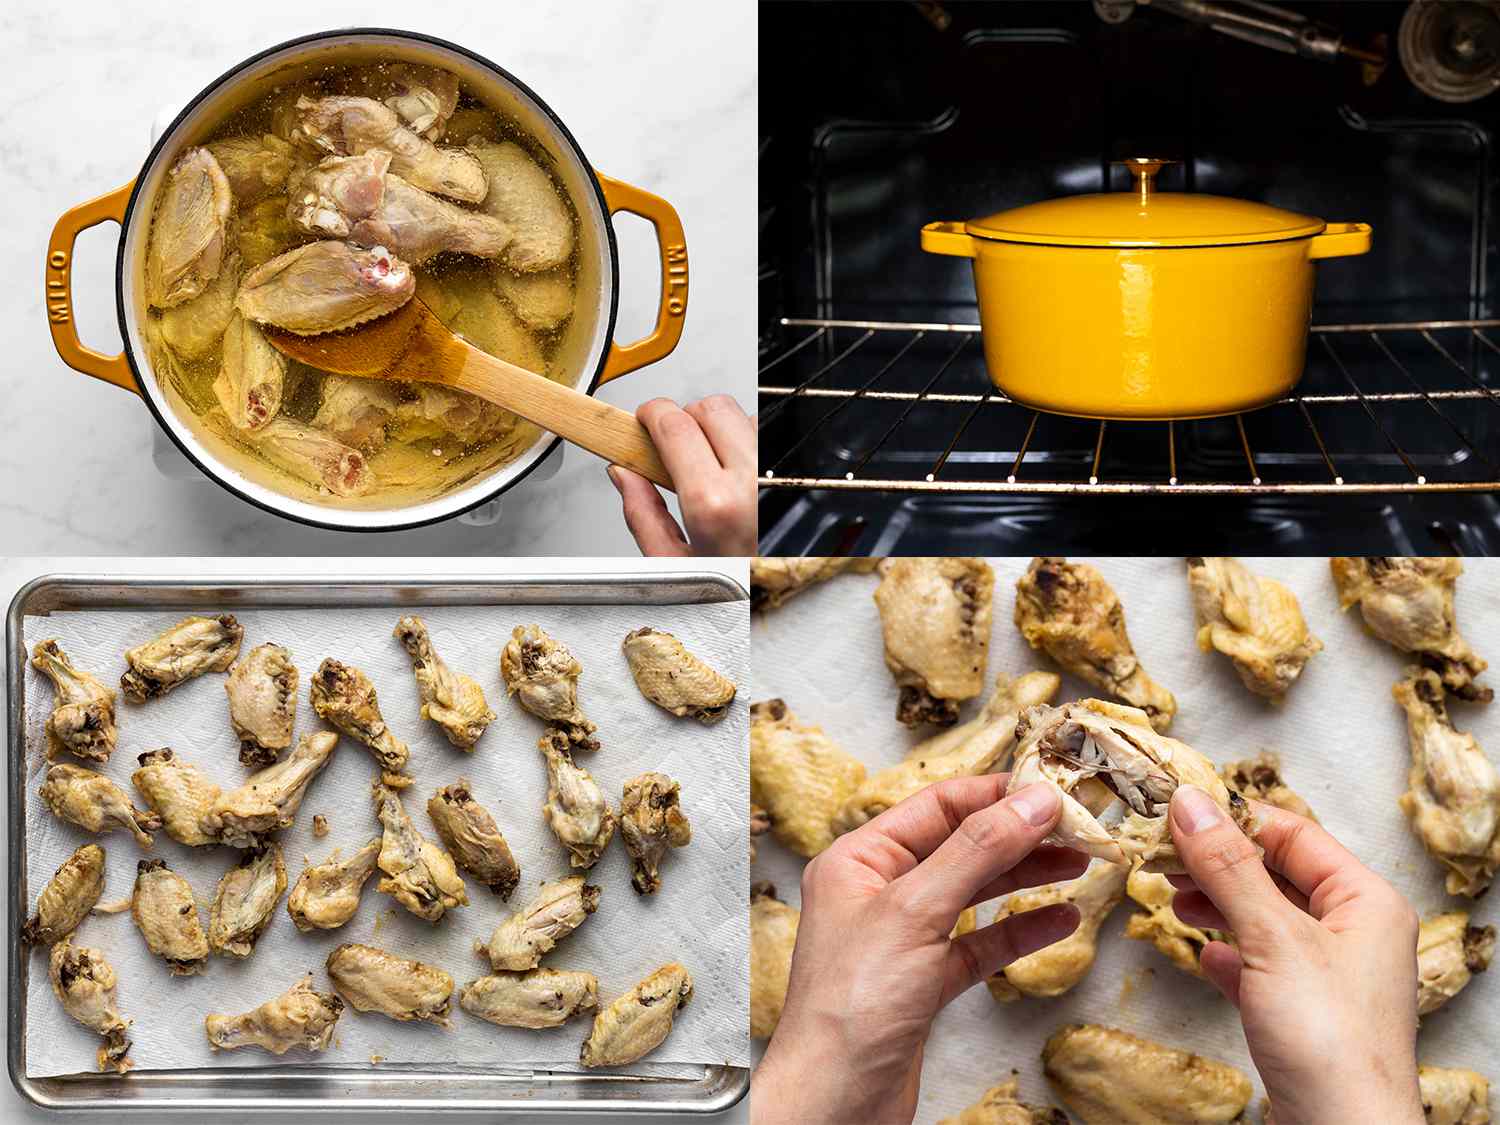 A horizontal four-image collage. The top left image shows the chicken wings cooking in a pot of gently bubbling oil, as evidenced by a small number of bubbles. One chicken wing is being lifted out of the oil with a wooden spatula. The top right photo shows the dutch oven inside of a larger oven, to demonstrate that this method calls for the chicken wings to be cooked in oil, inside of an oven. The bottom left photo shows the cooked chicken wings laid out on paper towels inside of a sheet pan. And the bottom right photo shows one chicken wing being gently pulled apart by a pair of hands, to show off the tender, cooked texture of the chicken.